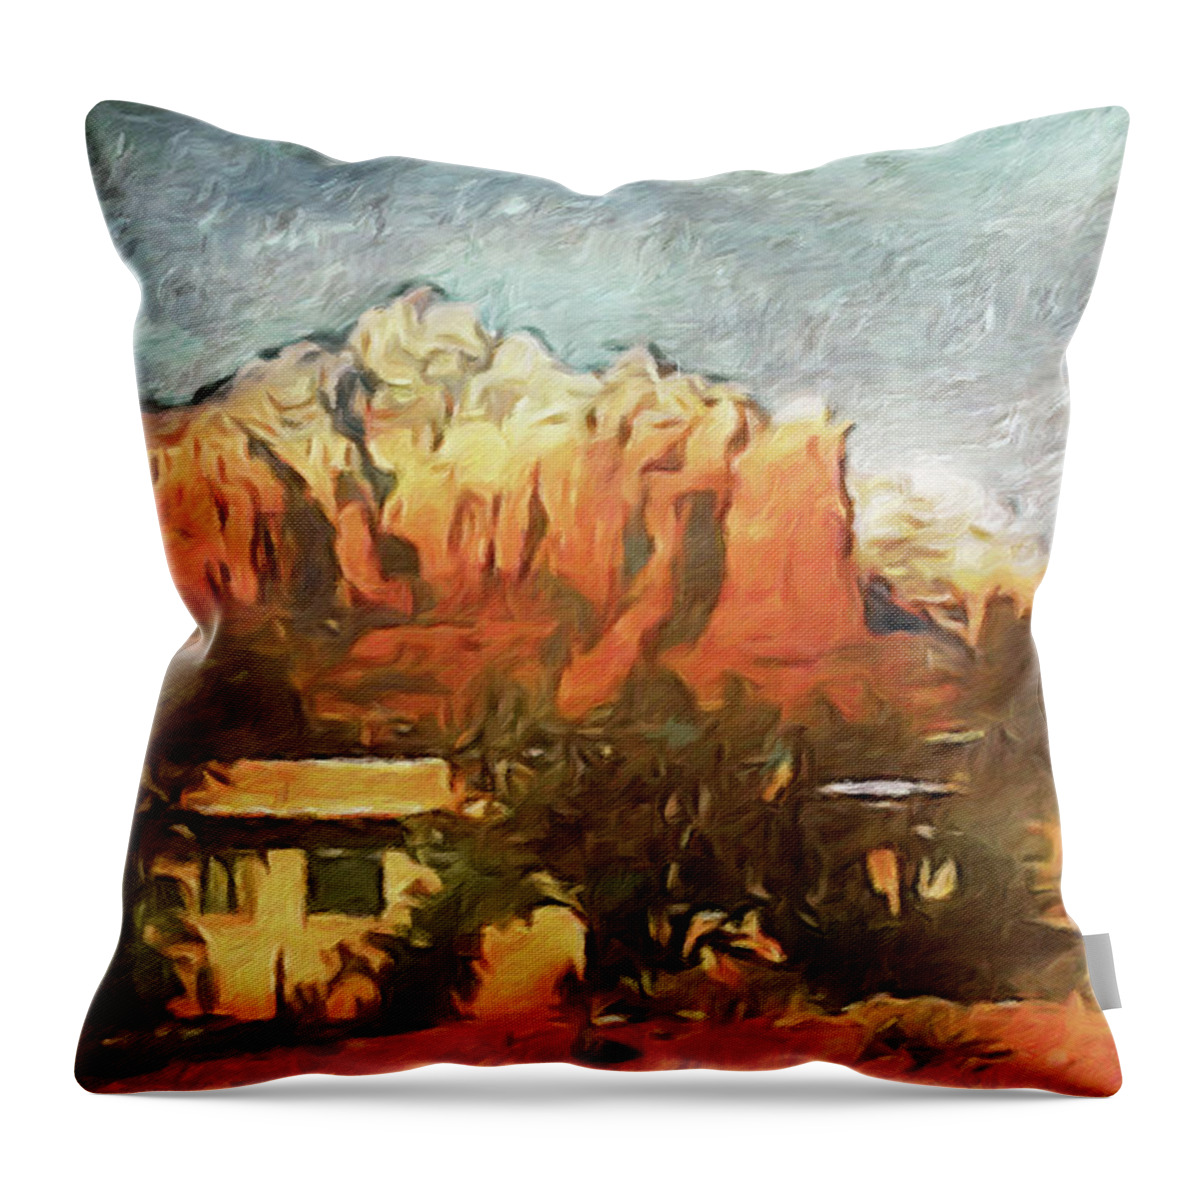 Sedona Throw Pillow featuring the painting Sedona by Susan Maxwell Schmidt